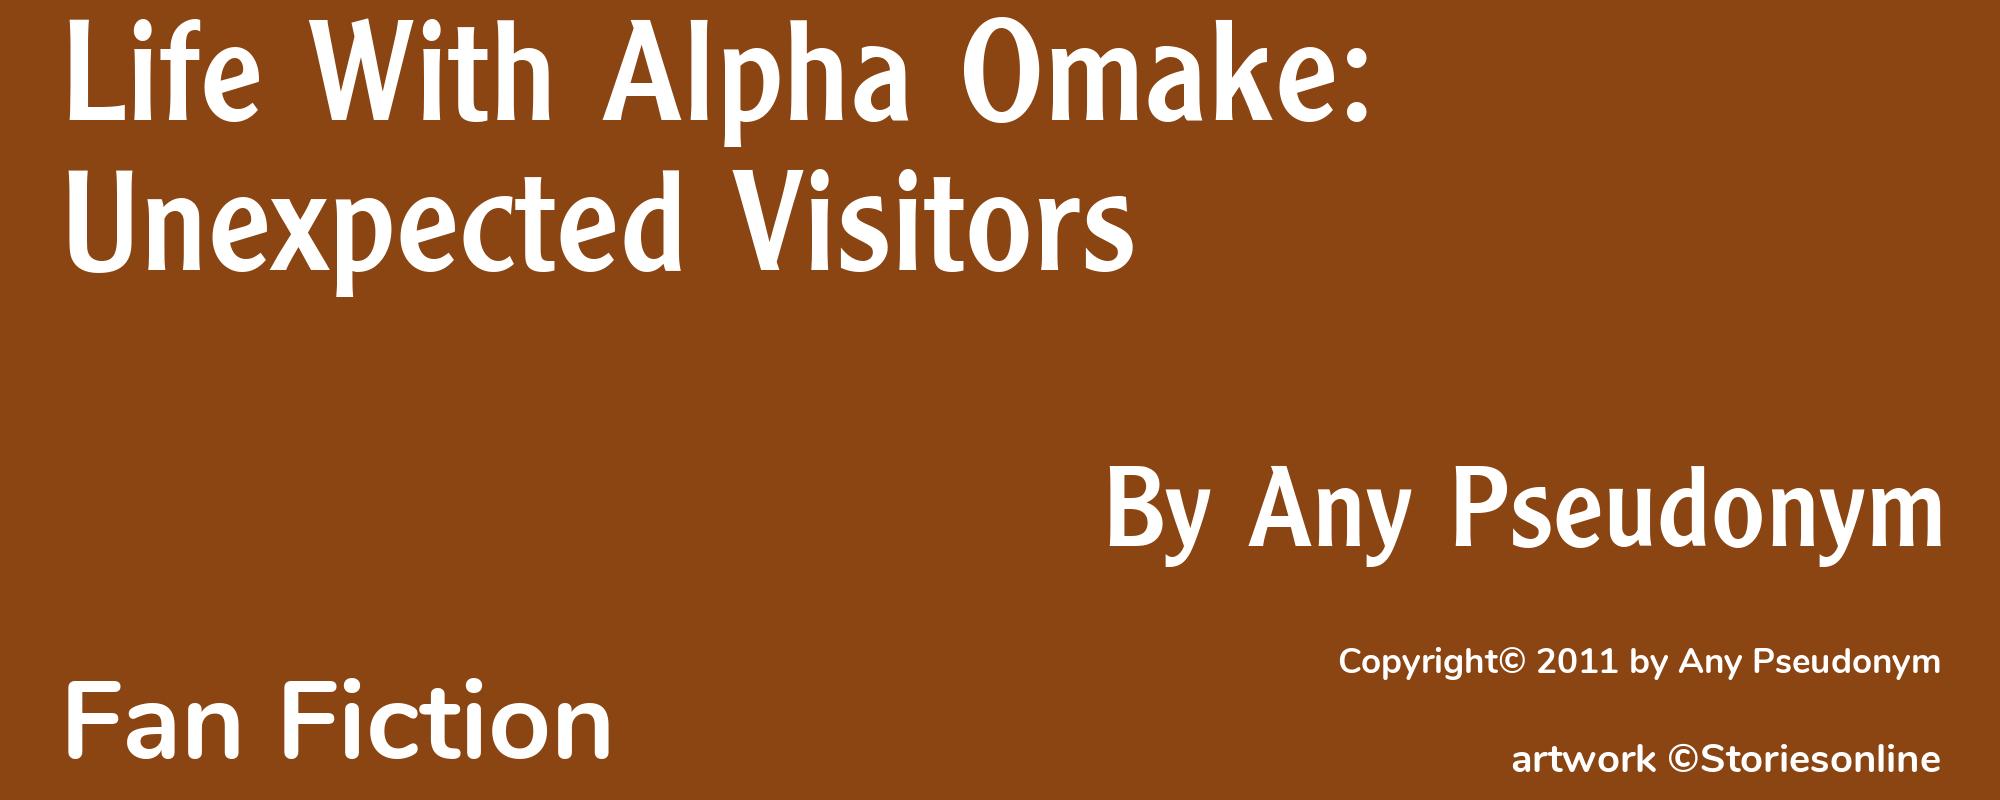 Life With Alpha Omake: Unexpected Visitors - Cover